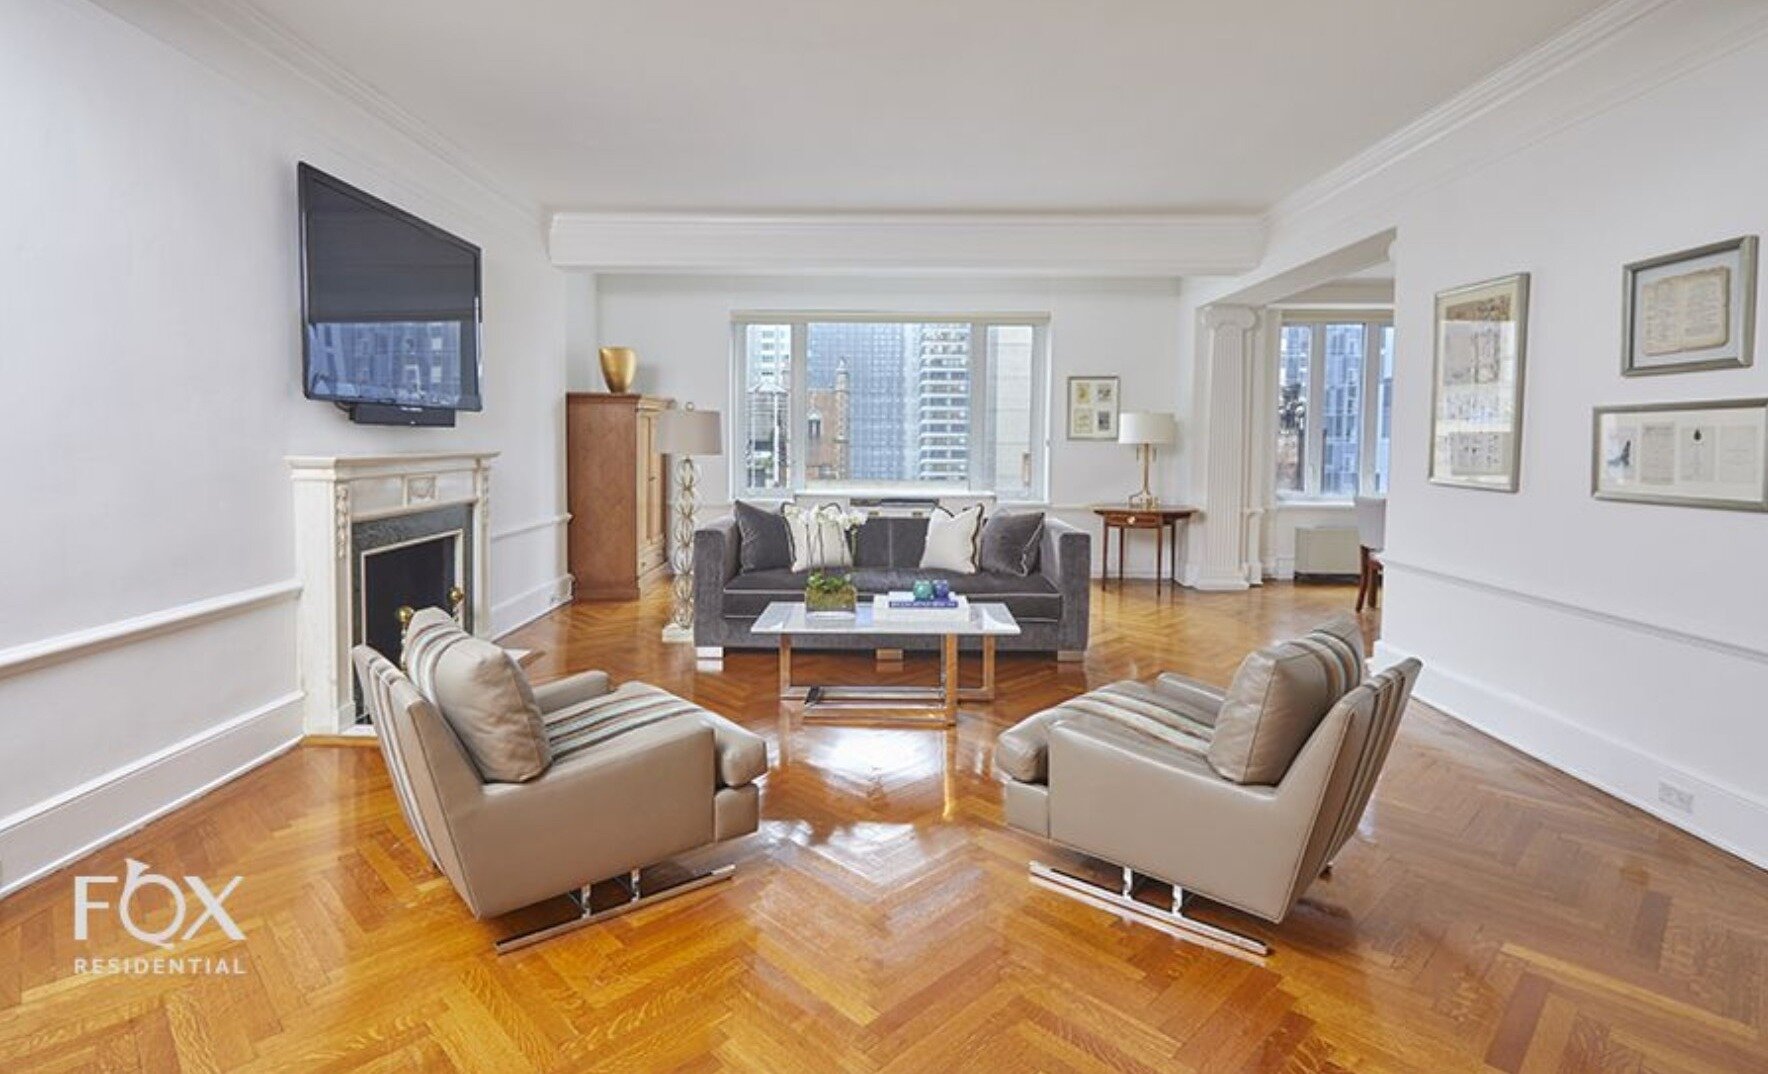 Screenshot of StreetEasy_ Hampshire House at 150 Central Park South in Central Park South, #1810 - Sales, Rentals, Floorplans _ StreetEasy.jpg